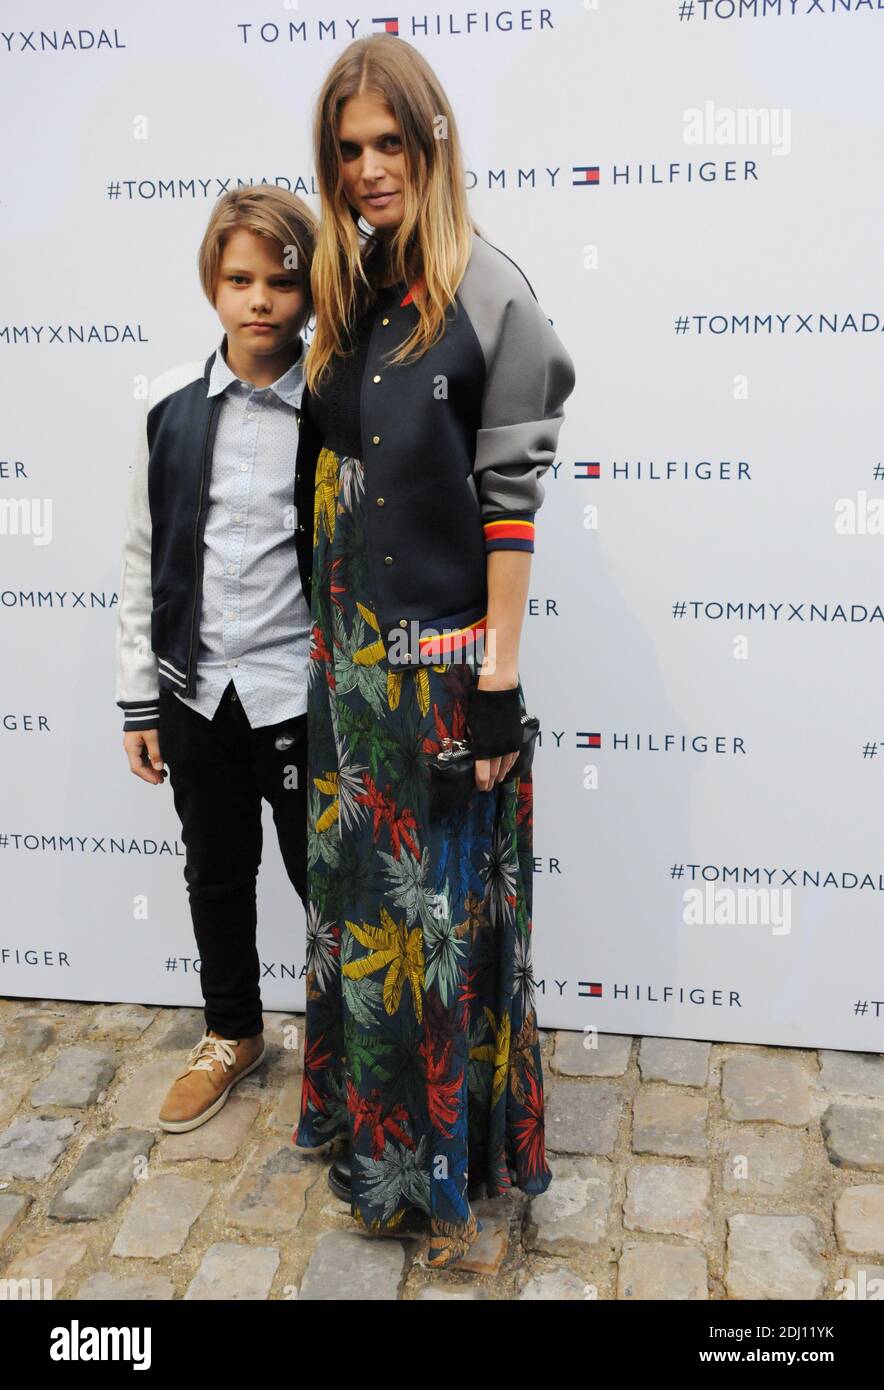 Malgosia Bela and son during Tommy Hilfiger hosts Tommy X Nadal Party -  Tennis Soccer Match in Paris, France on May 18, 2016. Photo by Alain  Apaydin/ABACAPRESS.COM Stock Photo - Alamy